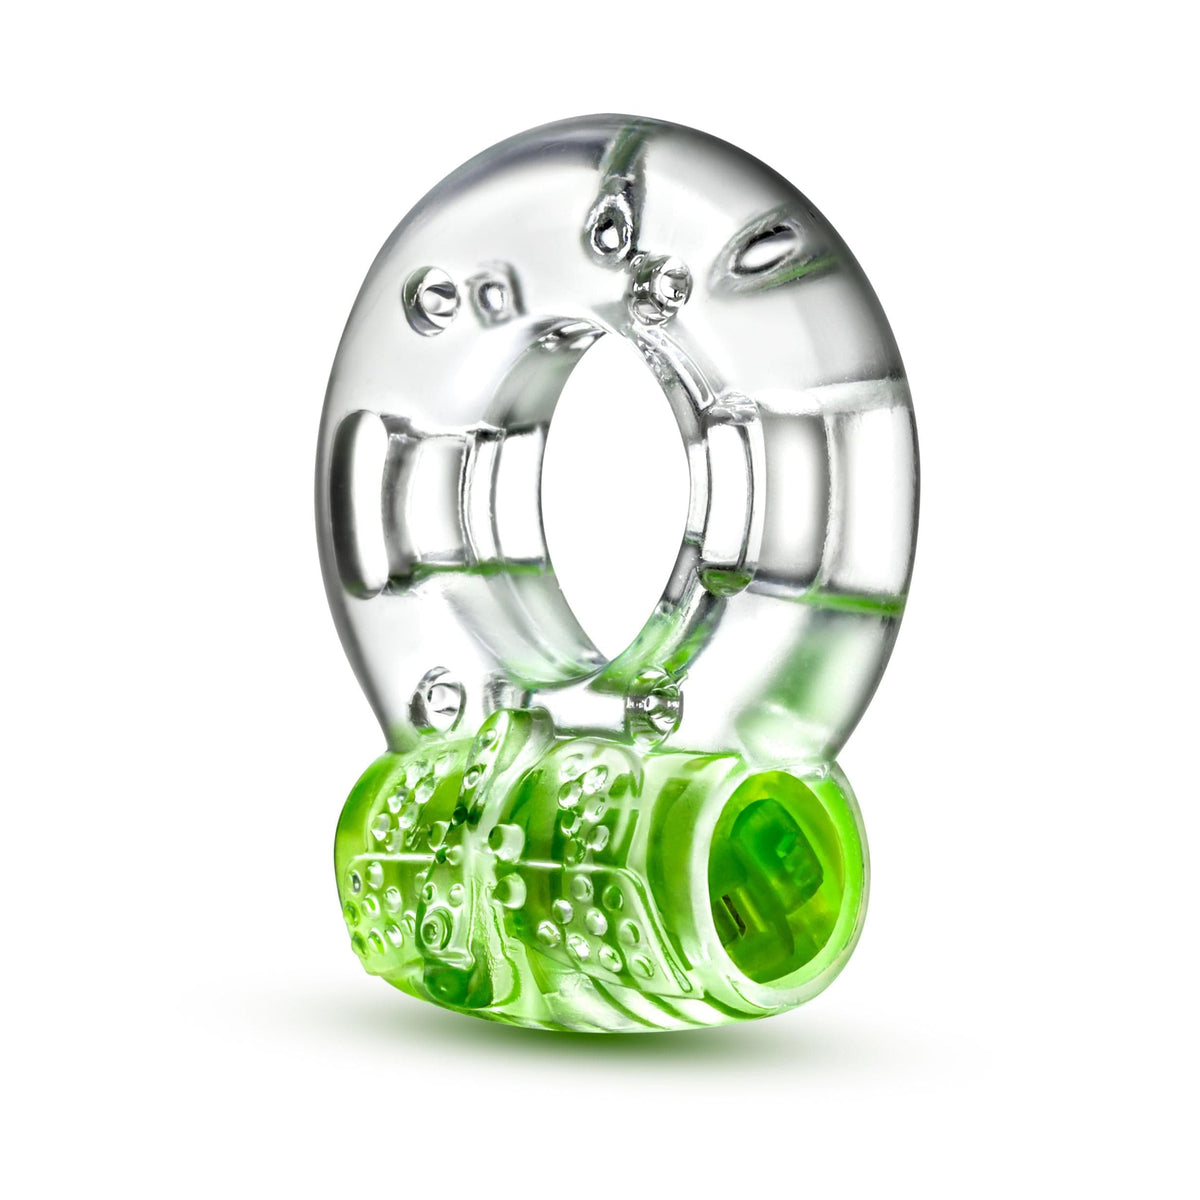 play with me arouser vibrating c ring green